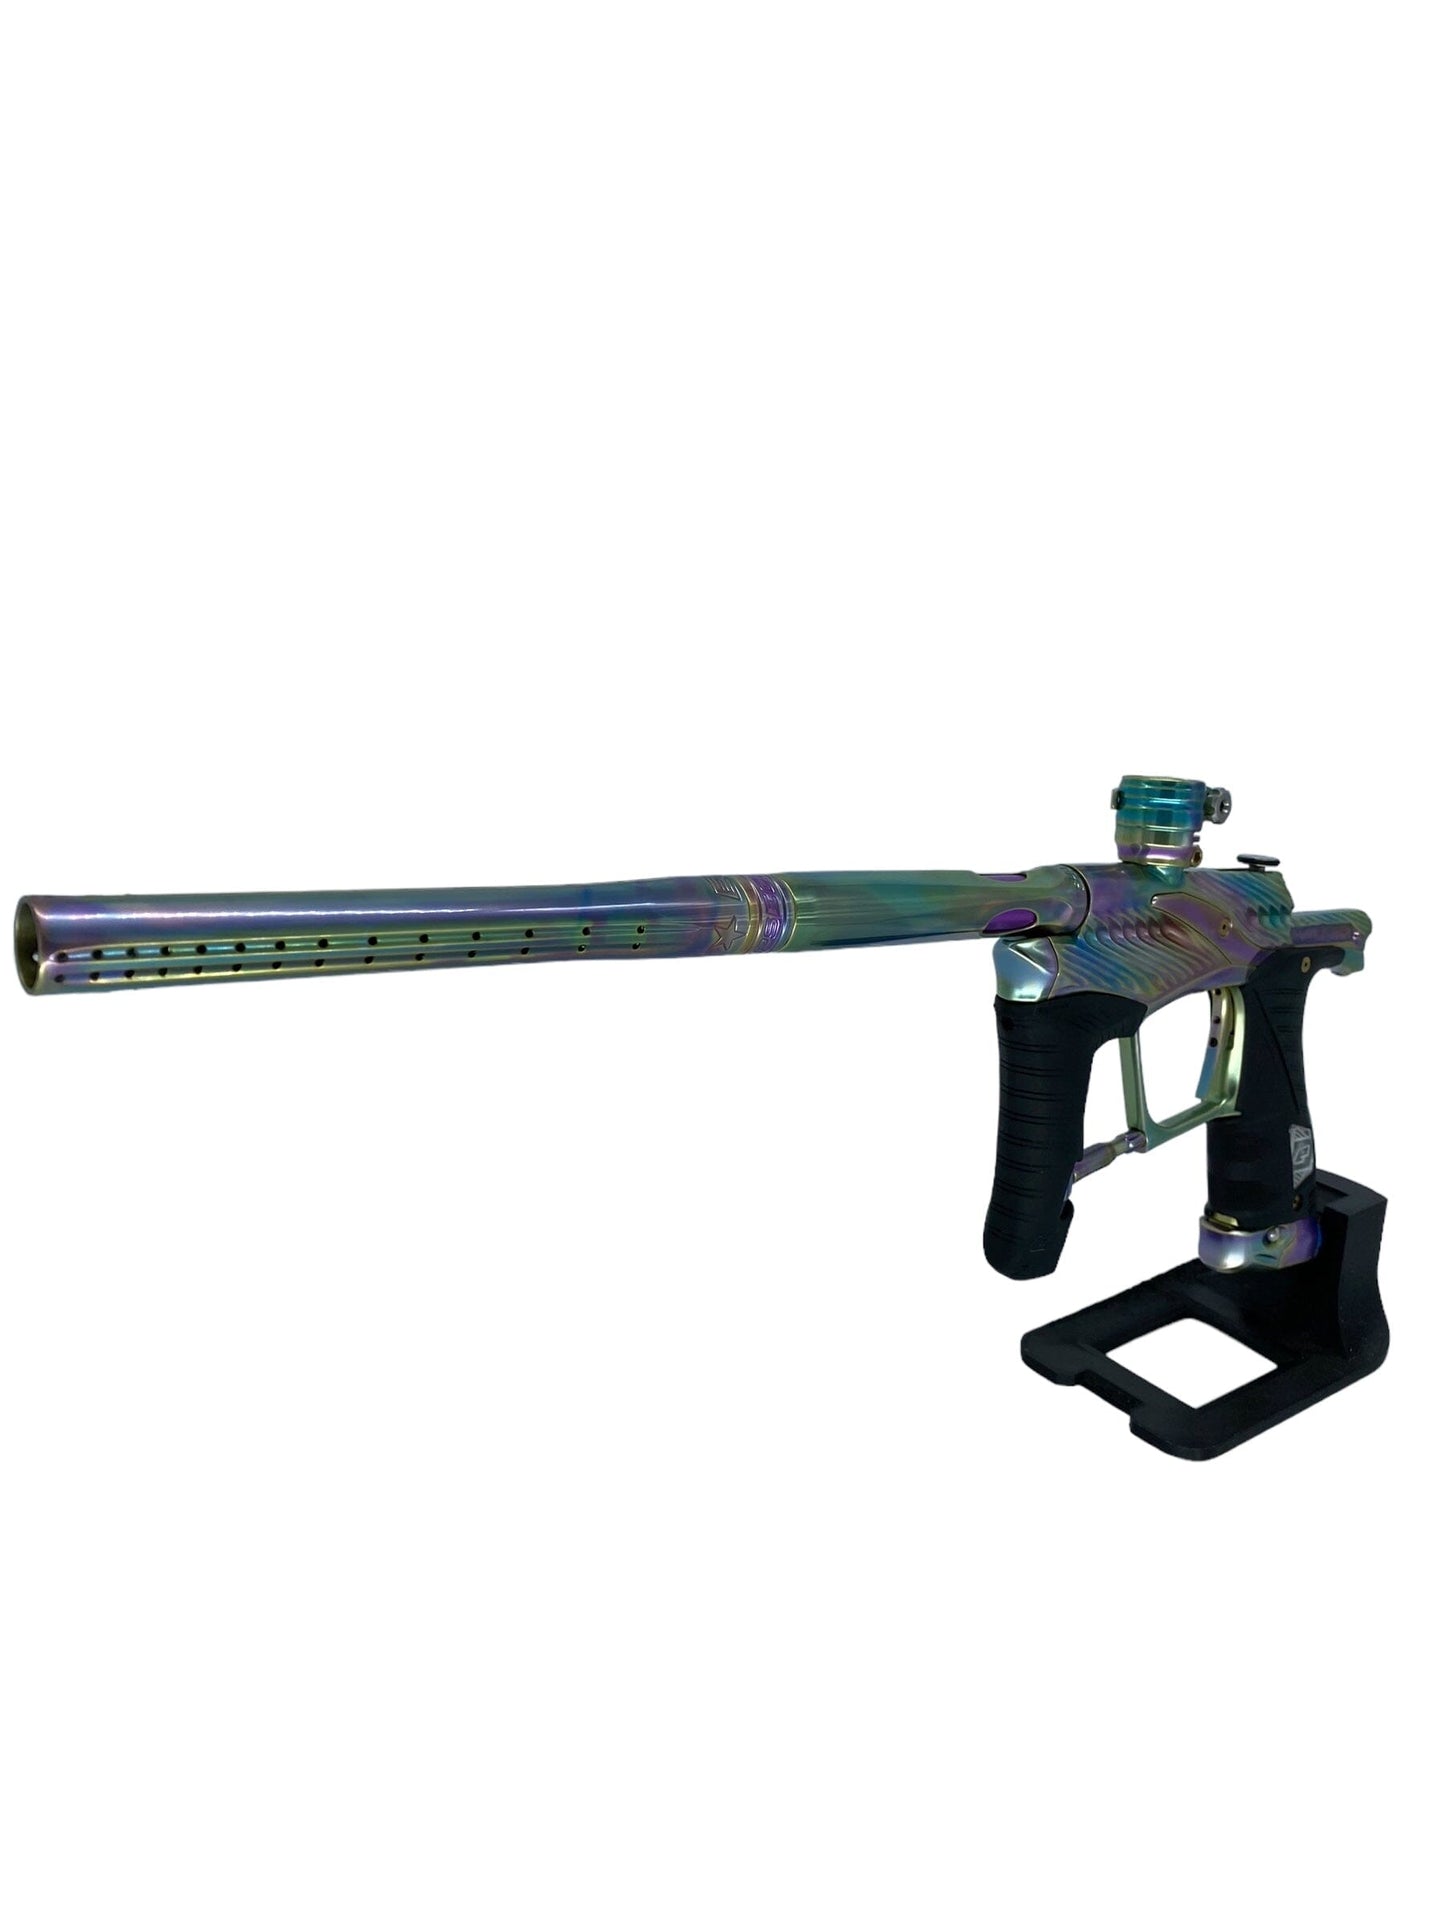 Used Planet Eclipse Twister (Foil) Lv1 Paintball Gun Paintball Gun from CPXBrosPaintball Buy/Sell/Trade Paintball Markers, New Paintball Guns, Paintball Hoppers, Paintball Masks, and Hormesis Headbands